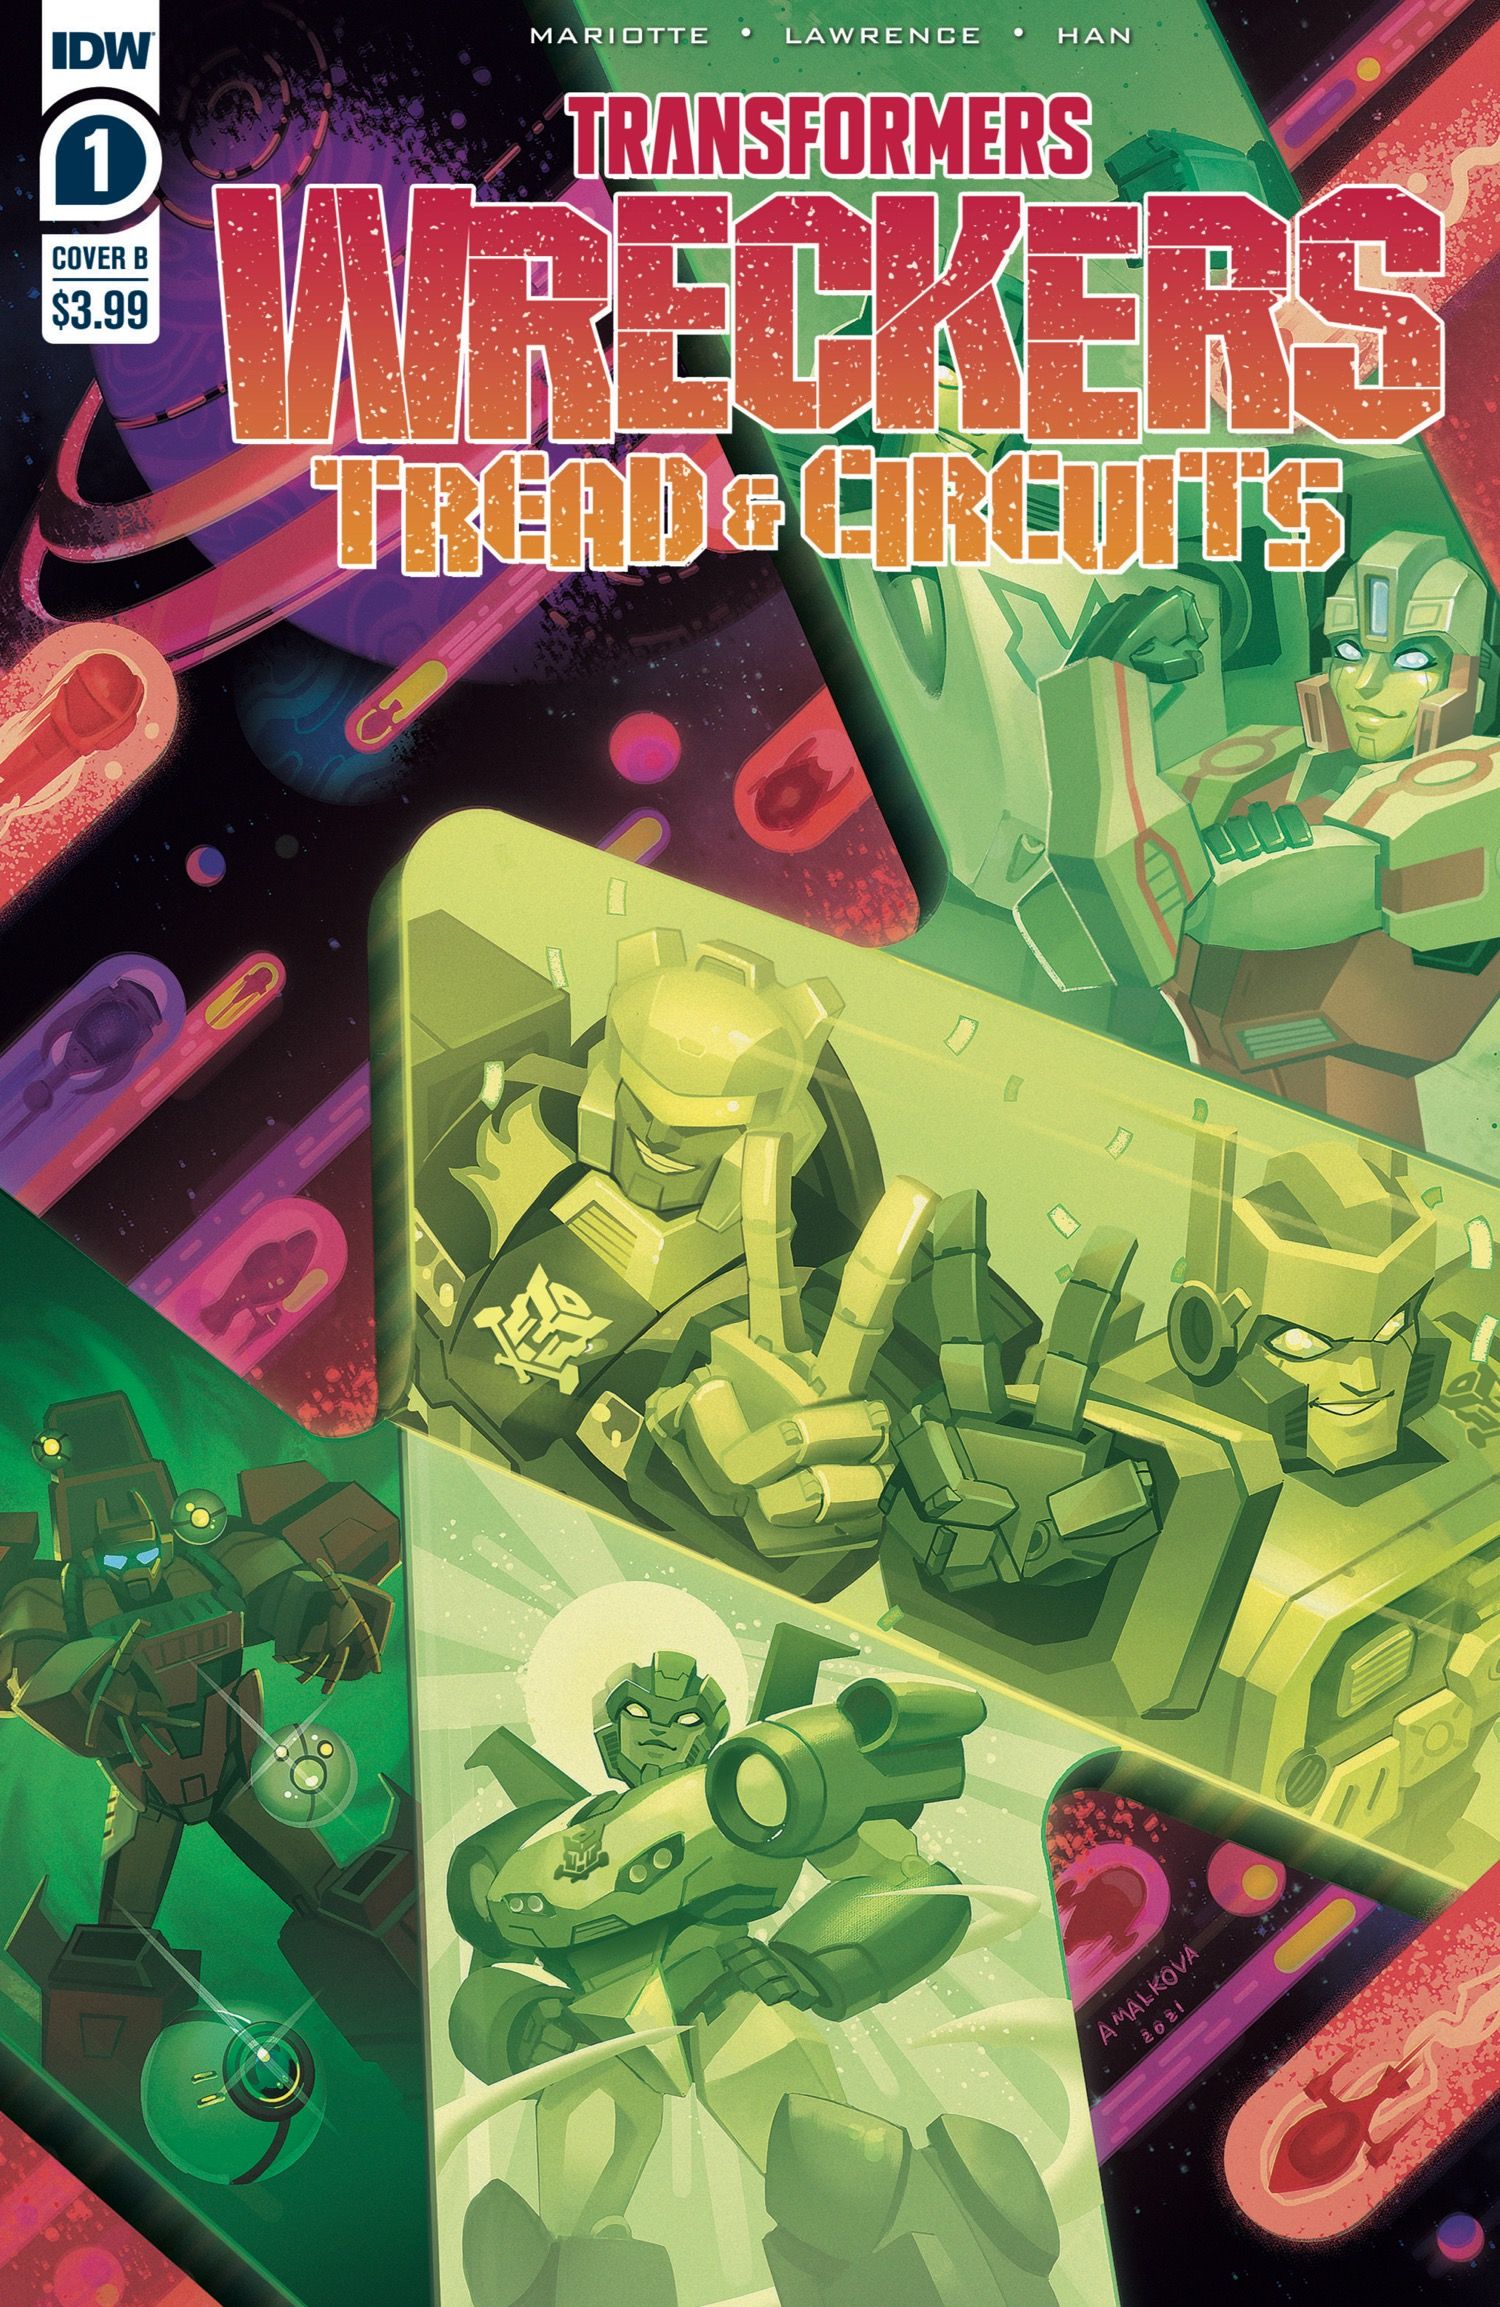 Transformers: Wreckers - Tread &amp; Circuits #1 Cover B